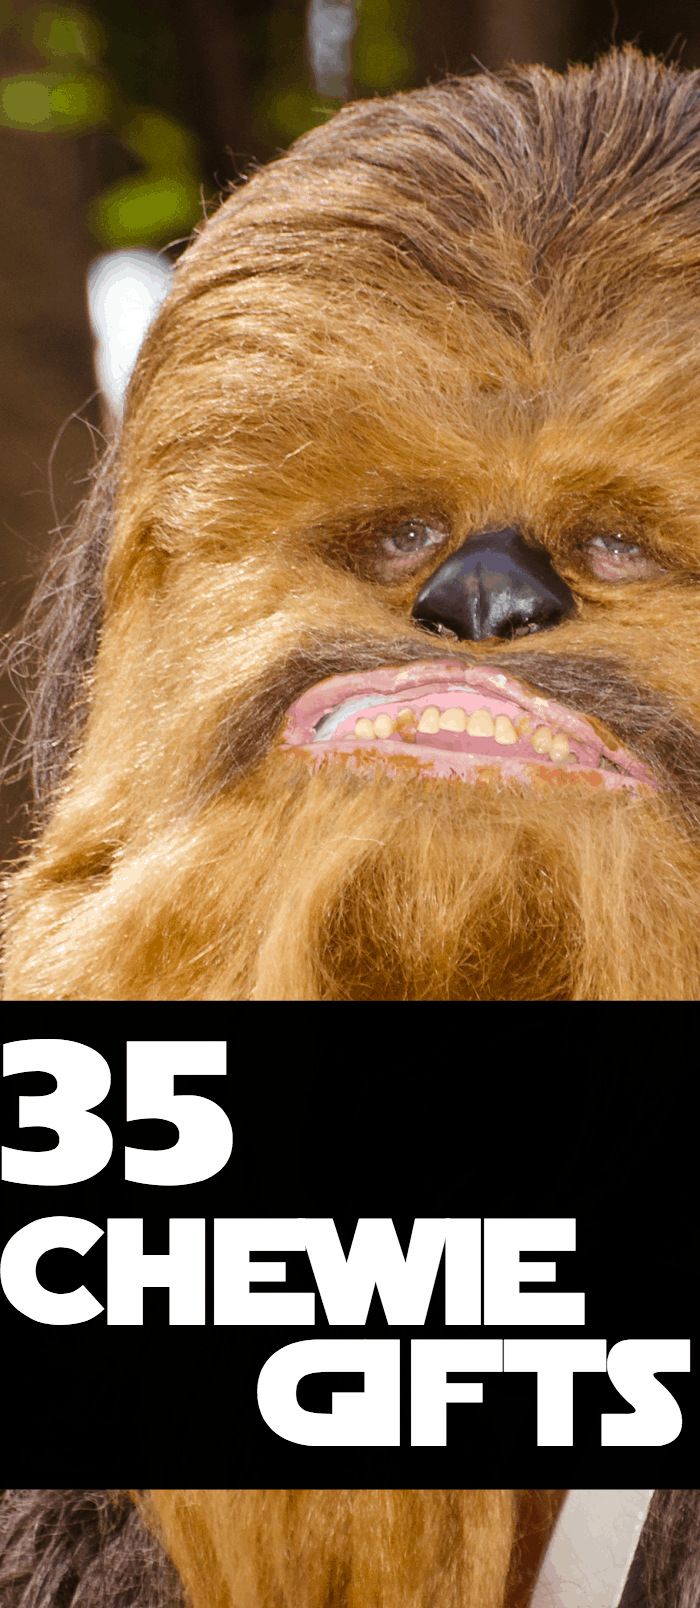 Let's be really clear--Chewbacca is the unsung hero of the entire Star Wars series. And for true Star Wars fans, the only real gift is the gift of fandom. So let's tip our hats to Chewie with these 35 Chewbacca Gifts - A Star Wars Gift Guide. #nerdymammablog #starwars #starwarsgiftguide #starwarsgifts #starwarsgiftideas #chewbaccagiftguide #chewiegiftguide #isitchewieorchewy